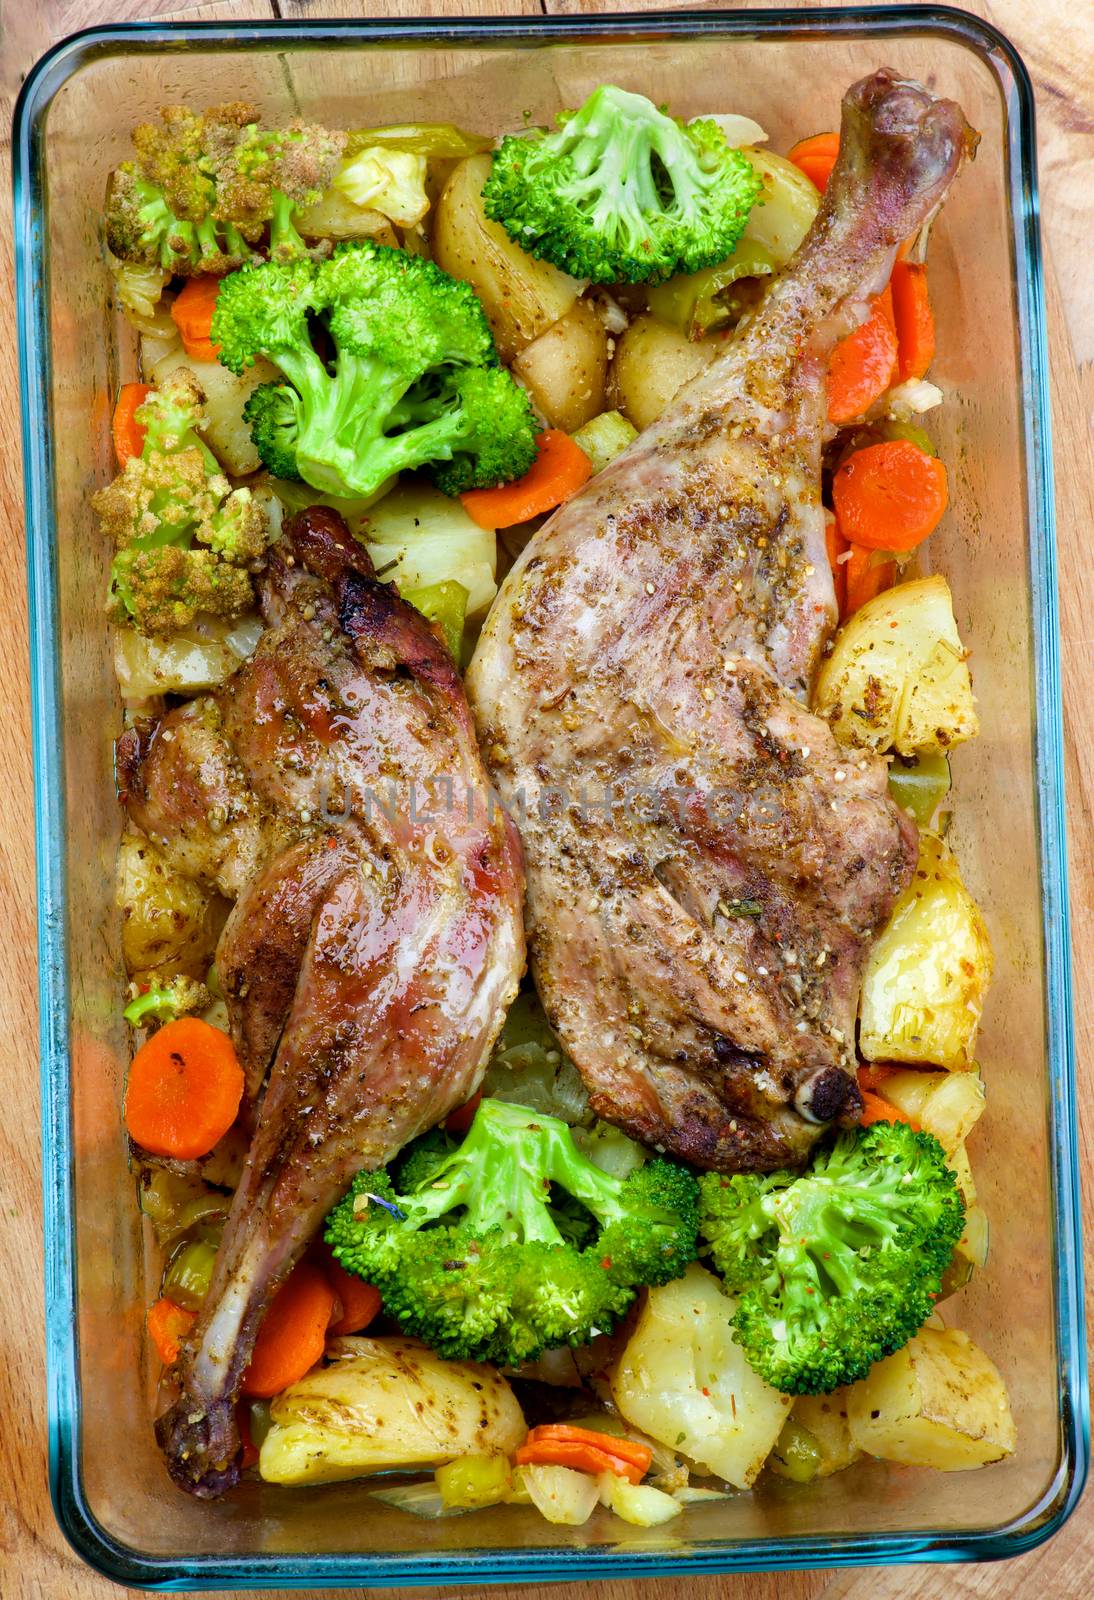 Delicious Oven-Baked Duck Legs with Potatoes, Carrot, Leek and Broccoli into Glass  Tray closeup on Wooden background